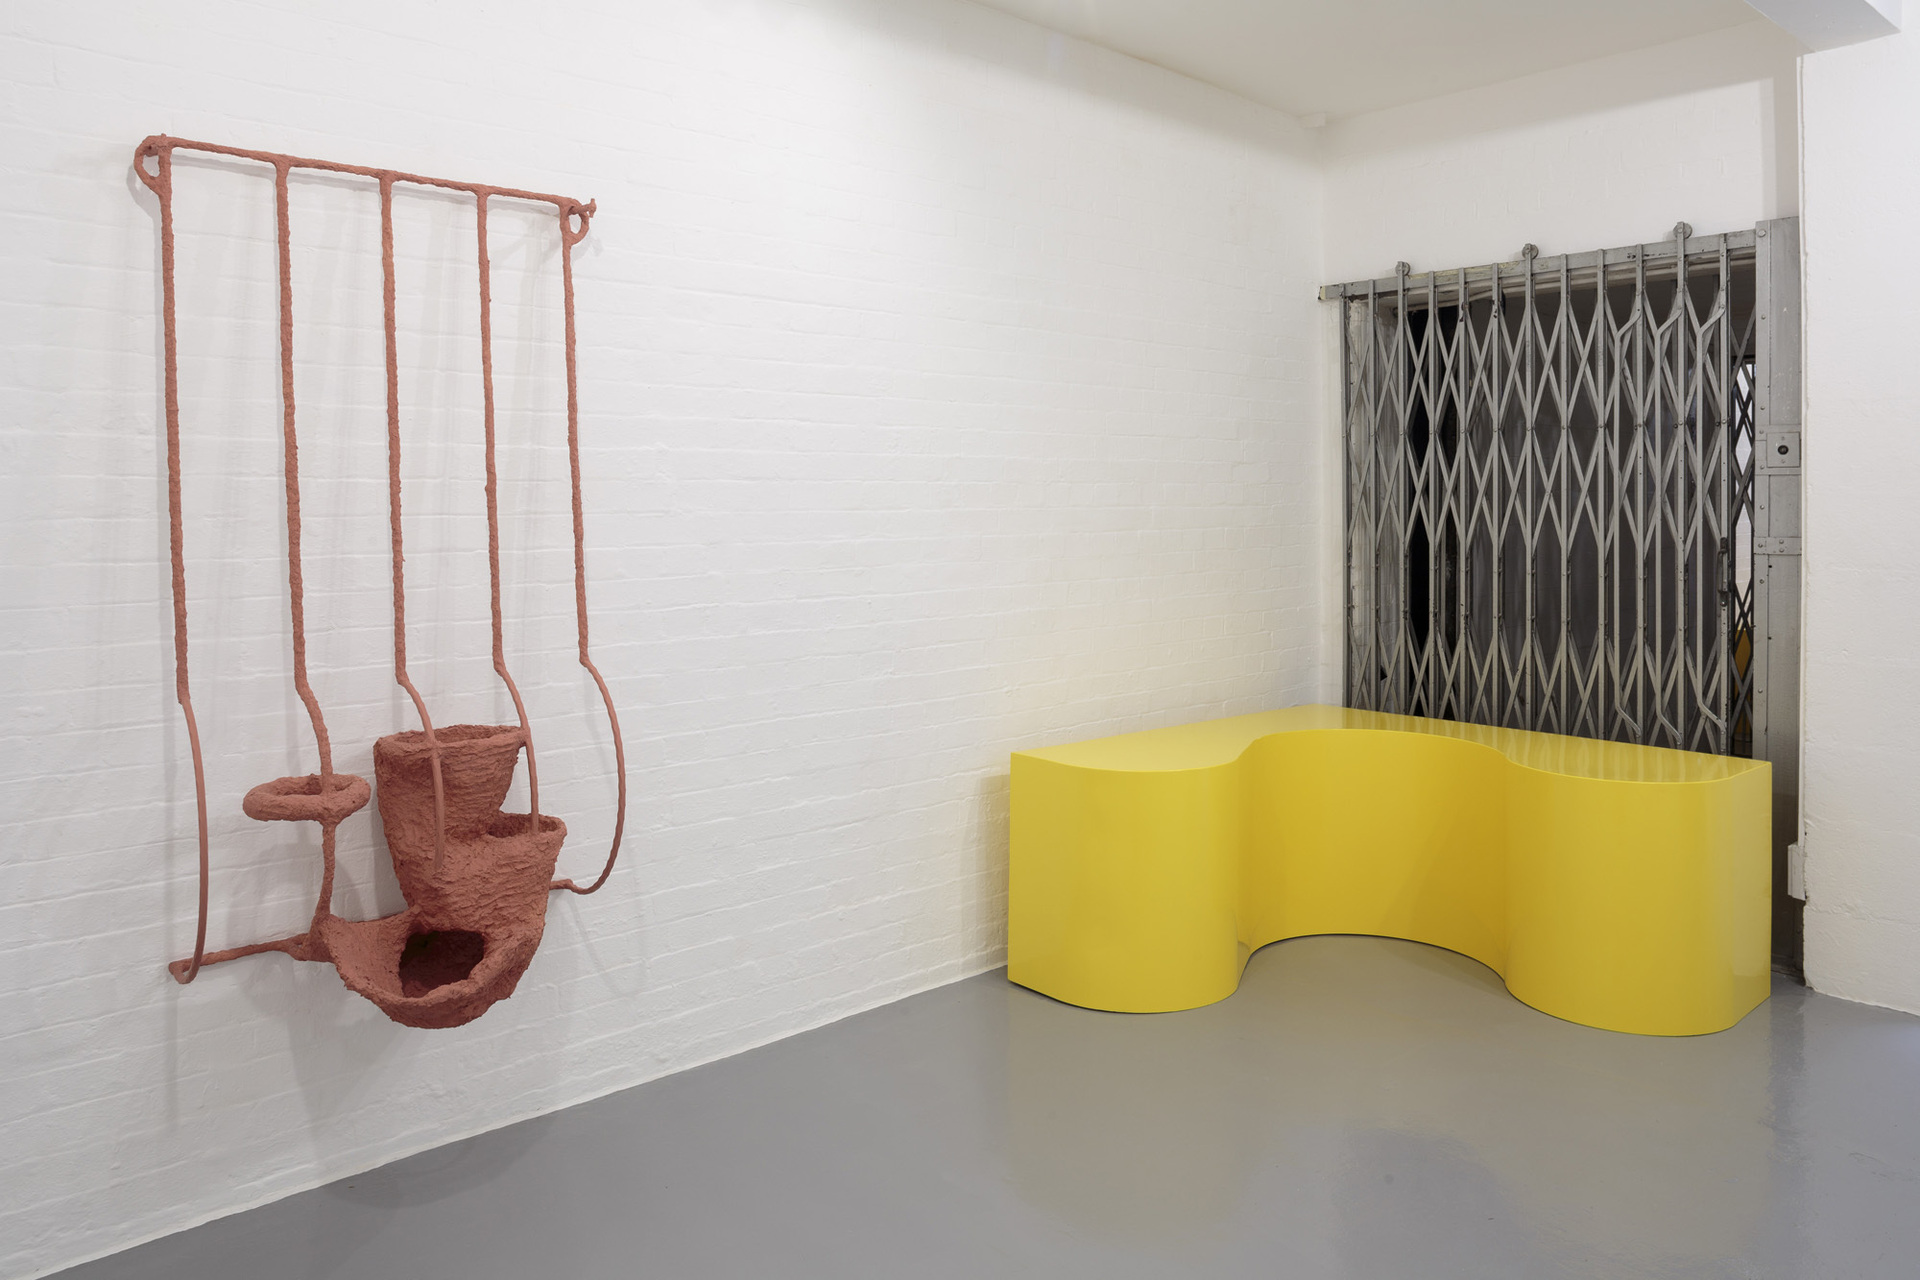 Olivia Bax, Off Grid, 2020, Installation View at Standpoint Gallery, London